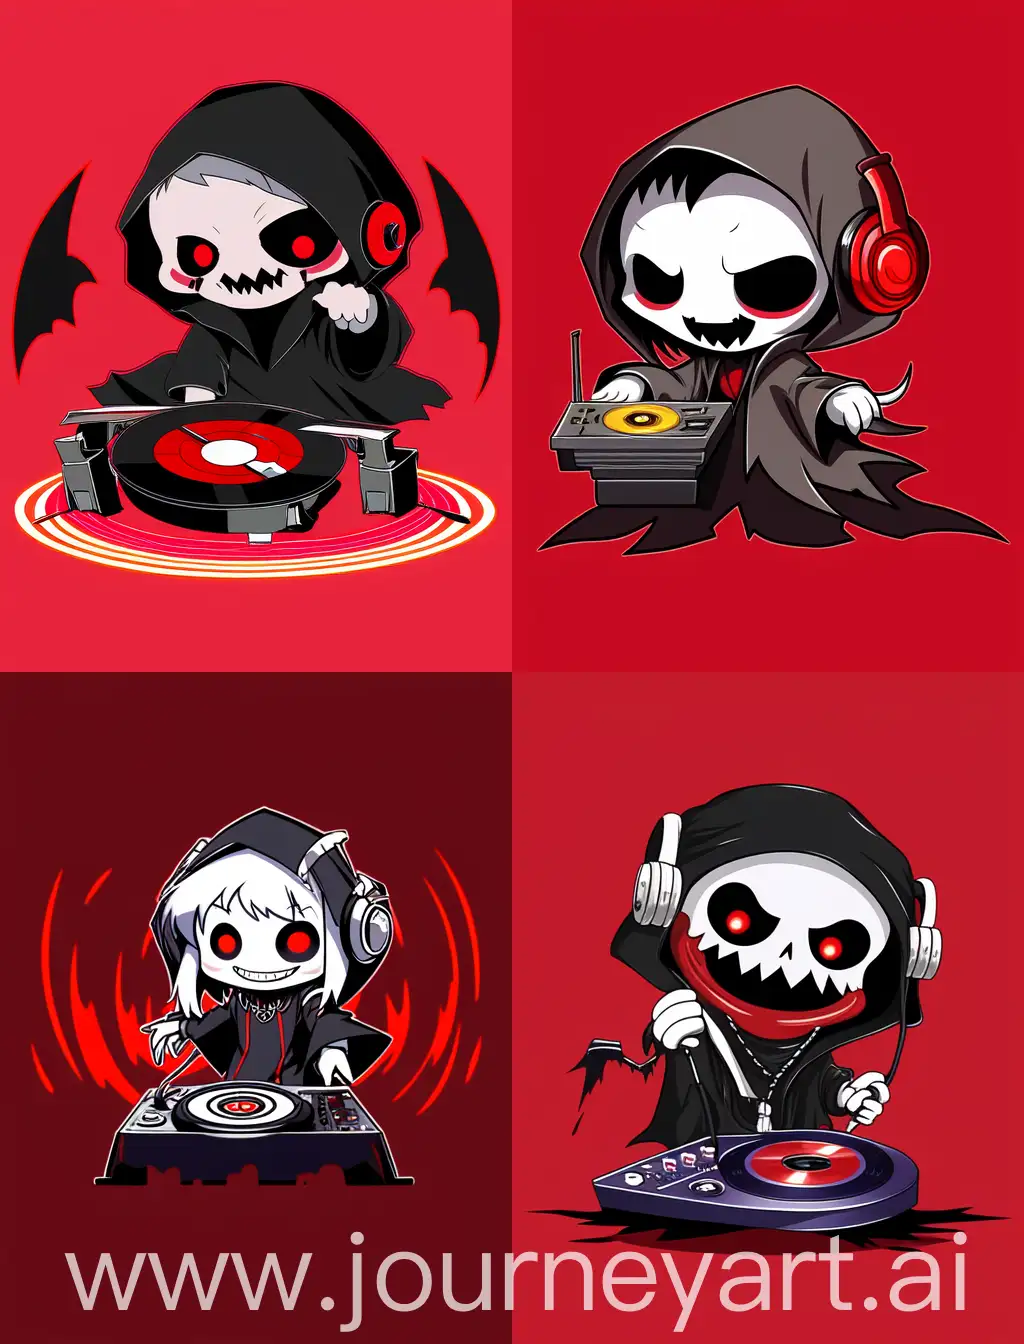 laughing chibi anime grim reaper playing dj, cartoon anime style, with strong lines, with red solid background